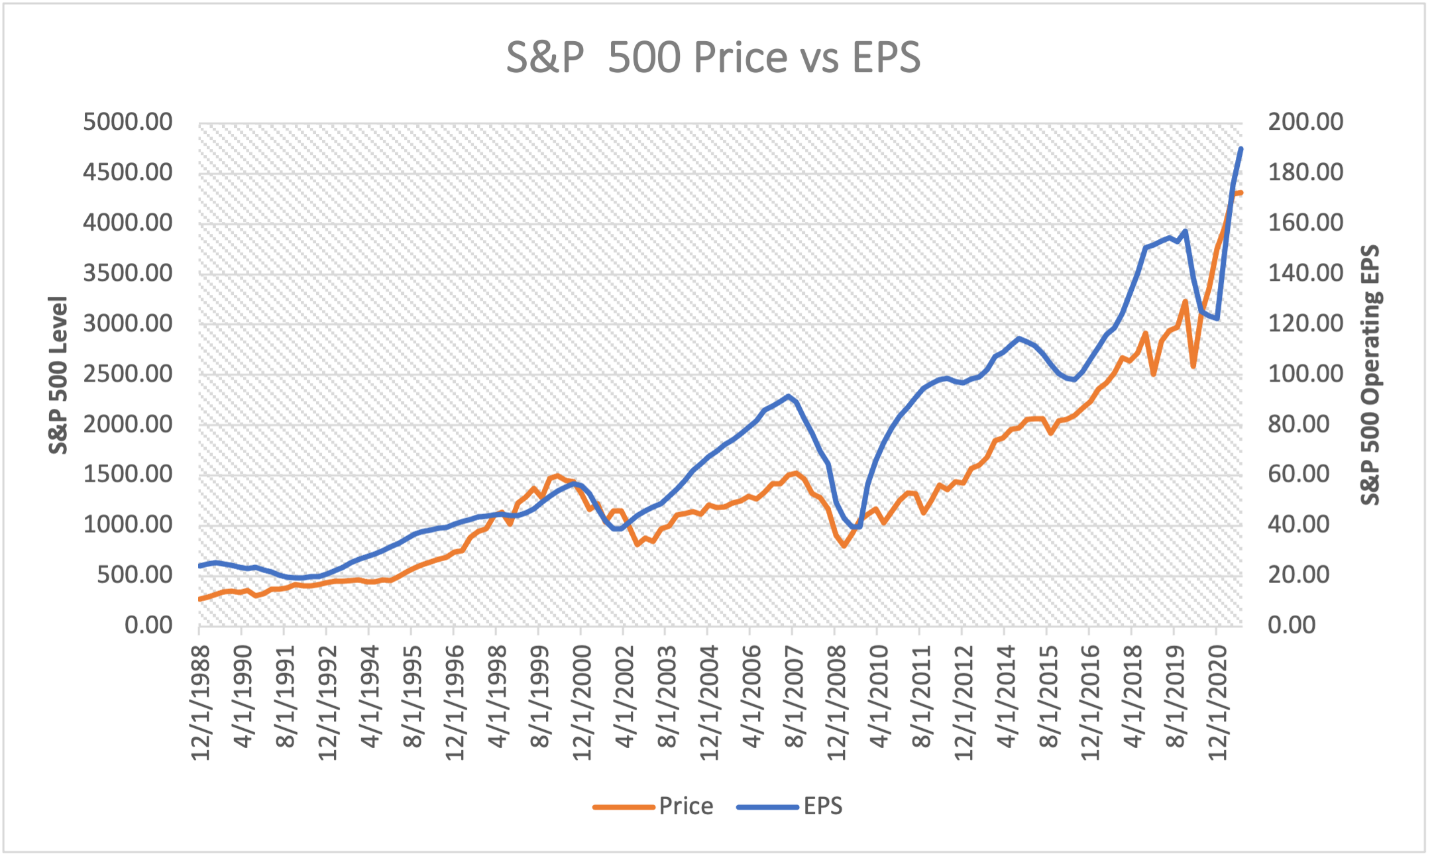 A chart showing the level of the S&P 500 and the operating EPS of the S&P 500 from 1988 to 2020.